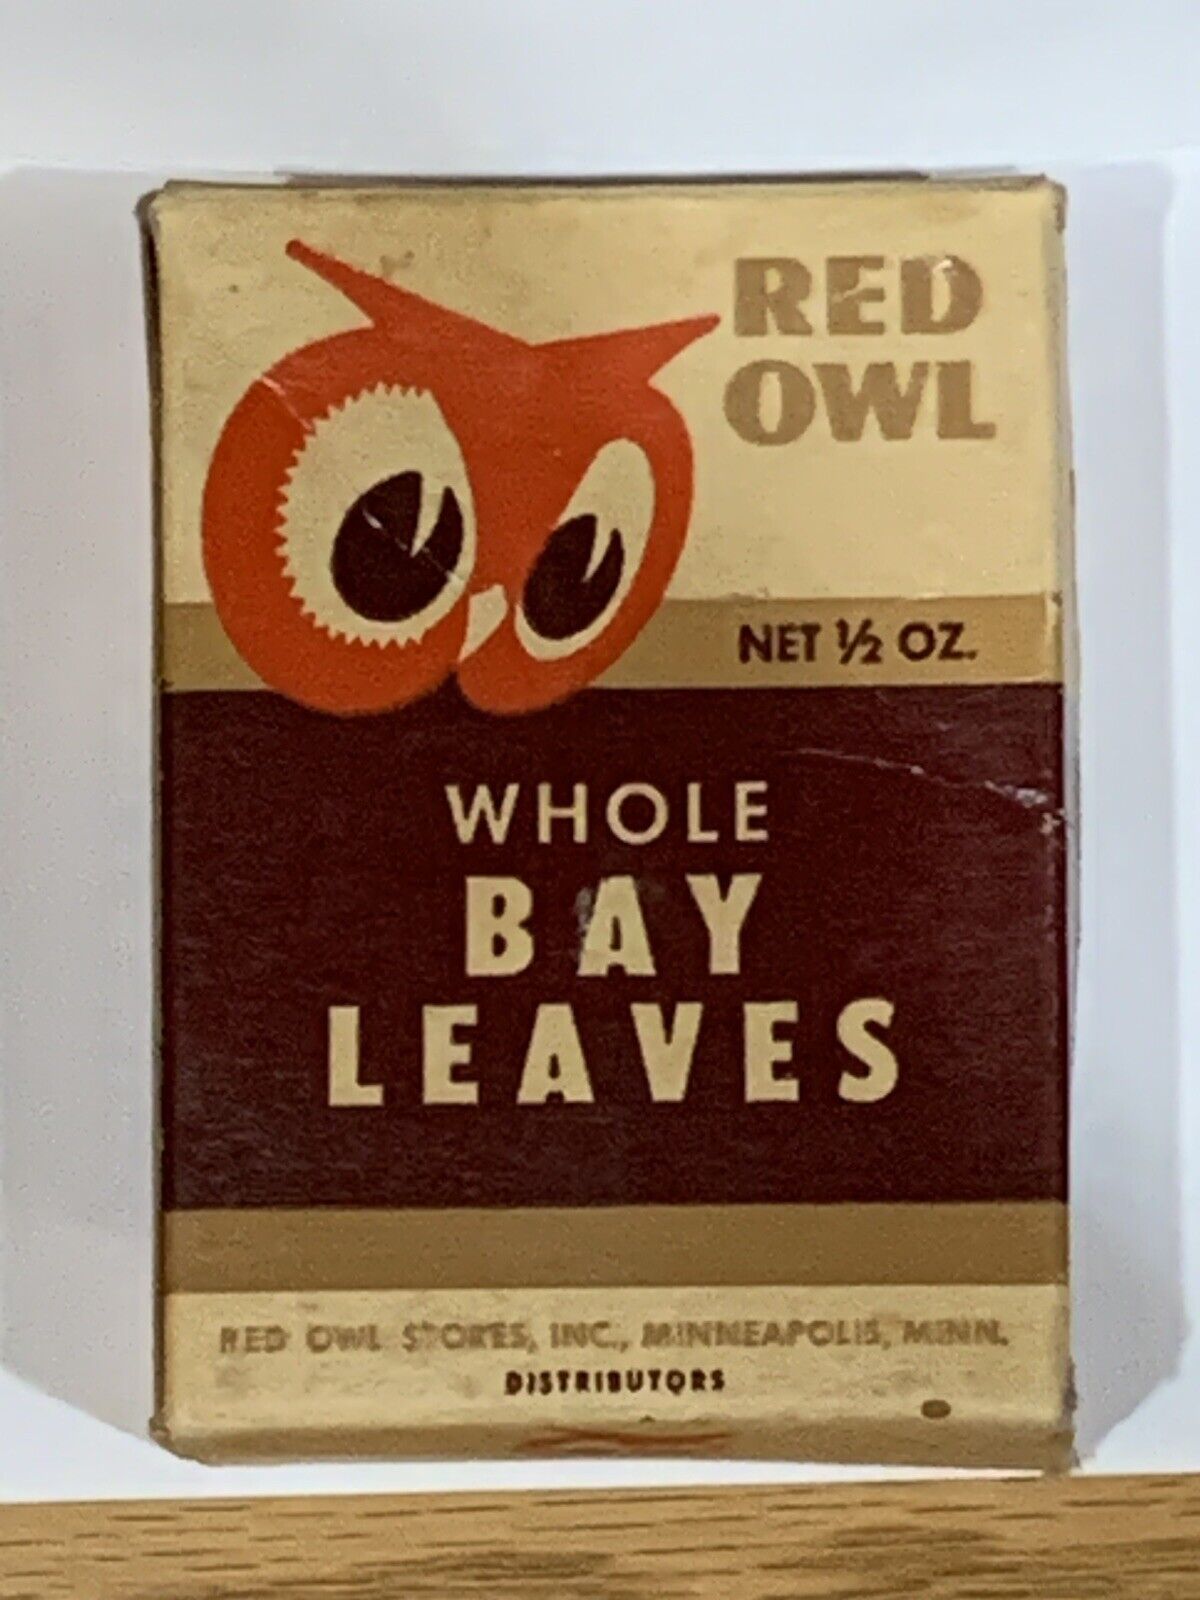 Vintage Red Owl Stores Whole BAY LEAVES spice box grocery store empty 1/2 oz